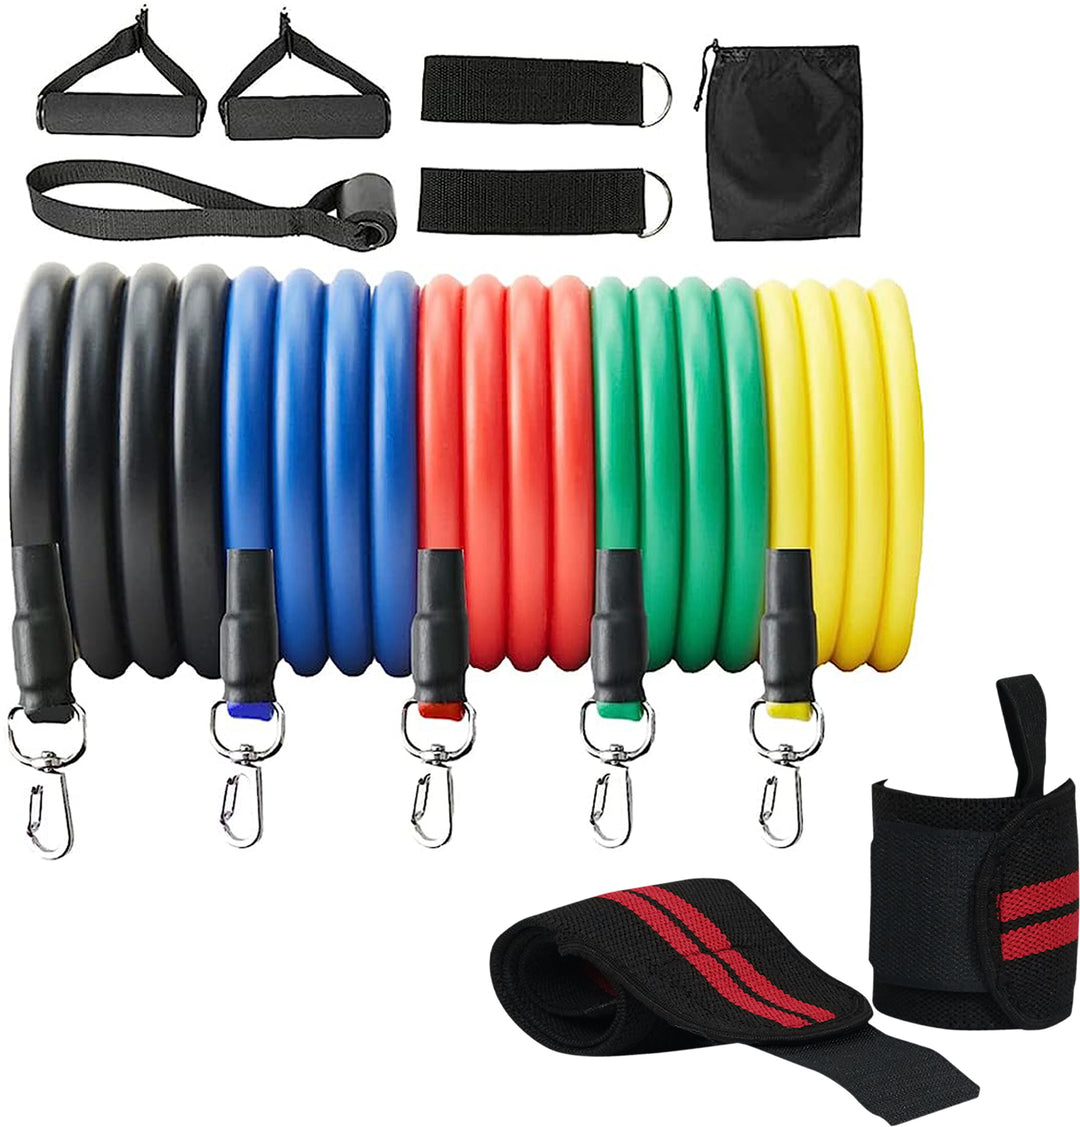 Fitness Combo of 11-In-1 Resistance Bands Set with Wrist Supports